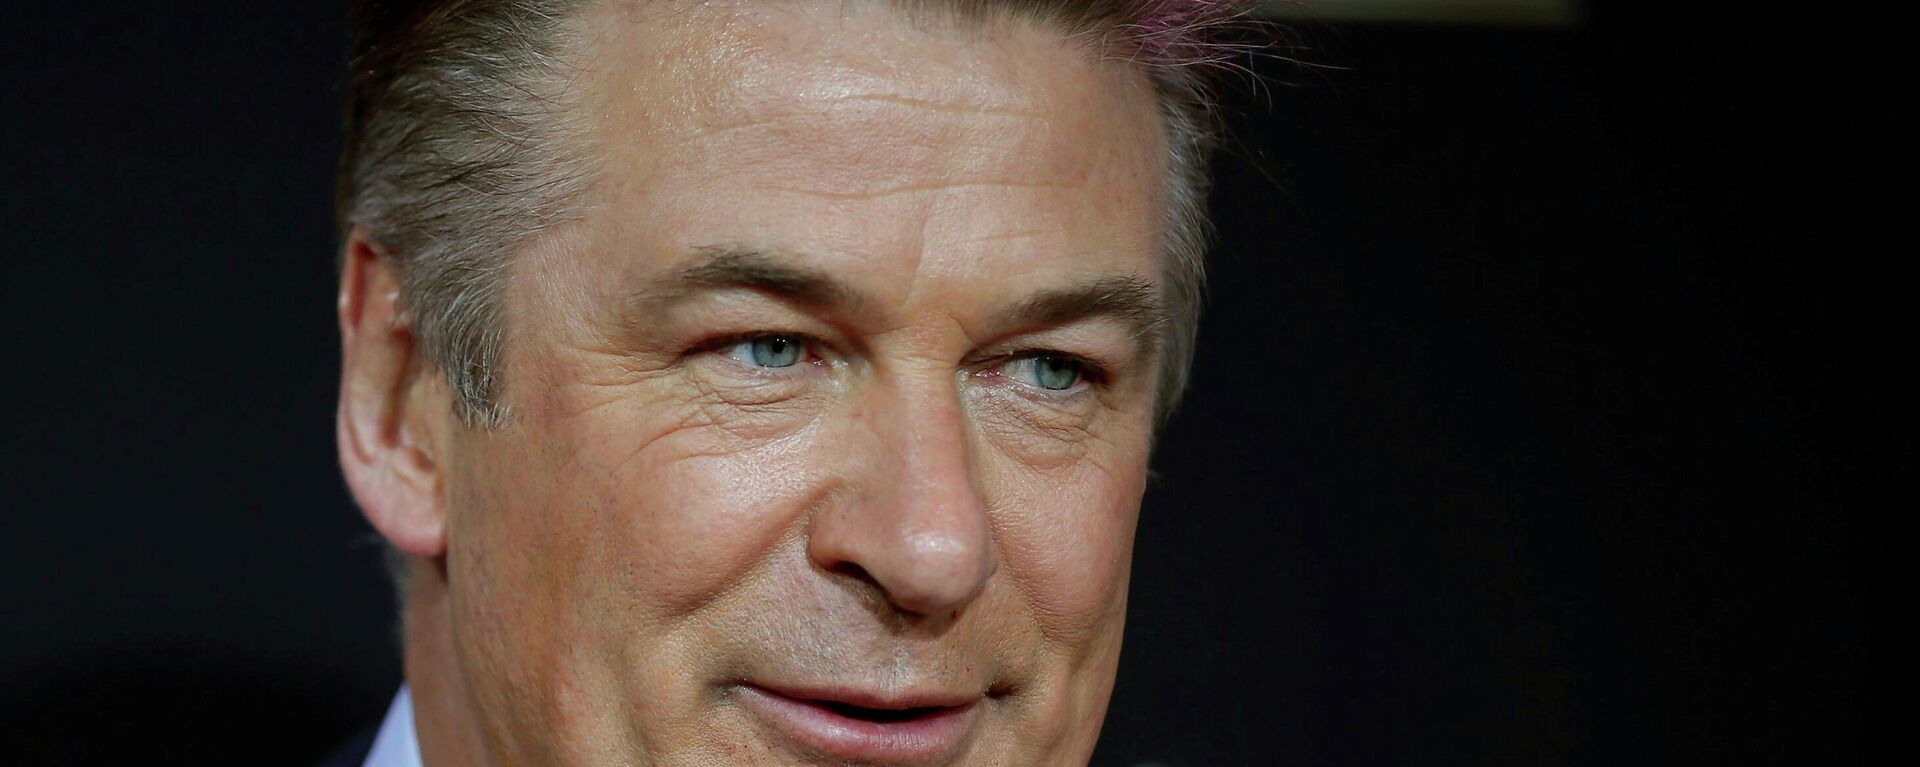 Host Alec Baldwin arrives at the 2nd Annual NFL Honors in New Orleans, Louisiana, February 2, 2013. - Sputnik International, 1920, 08.11.2021